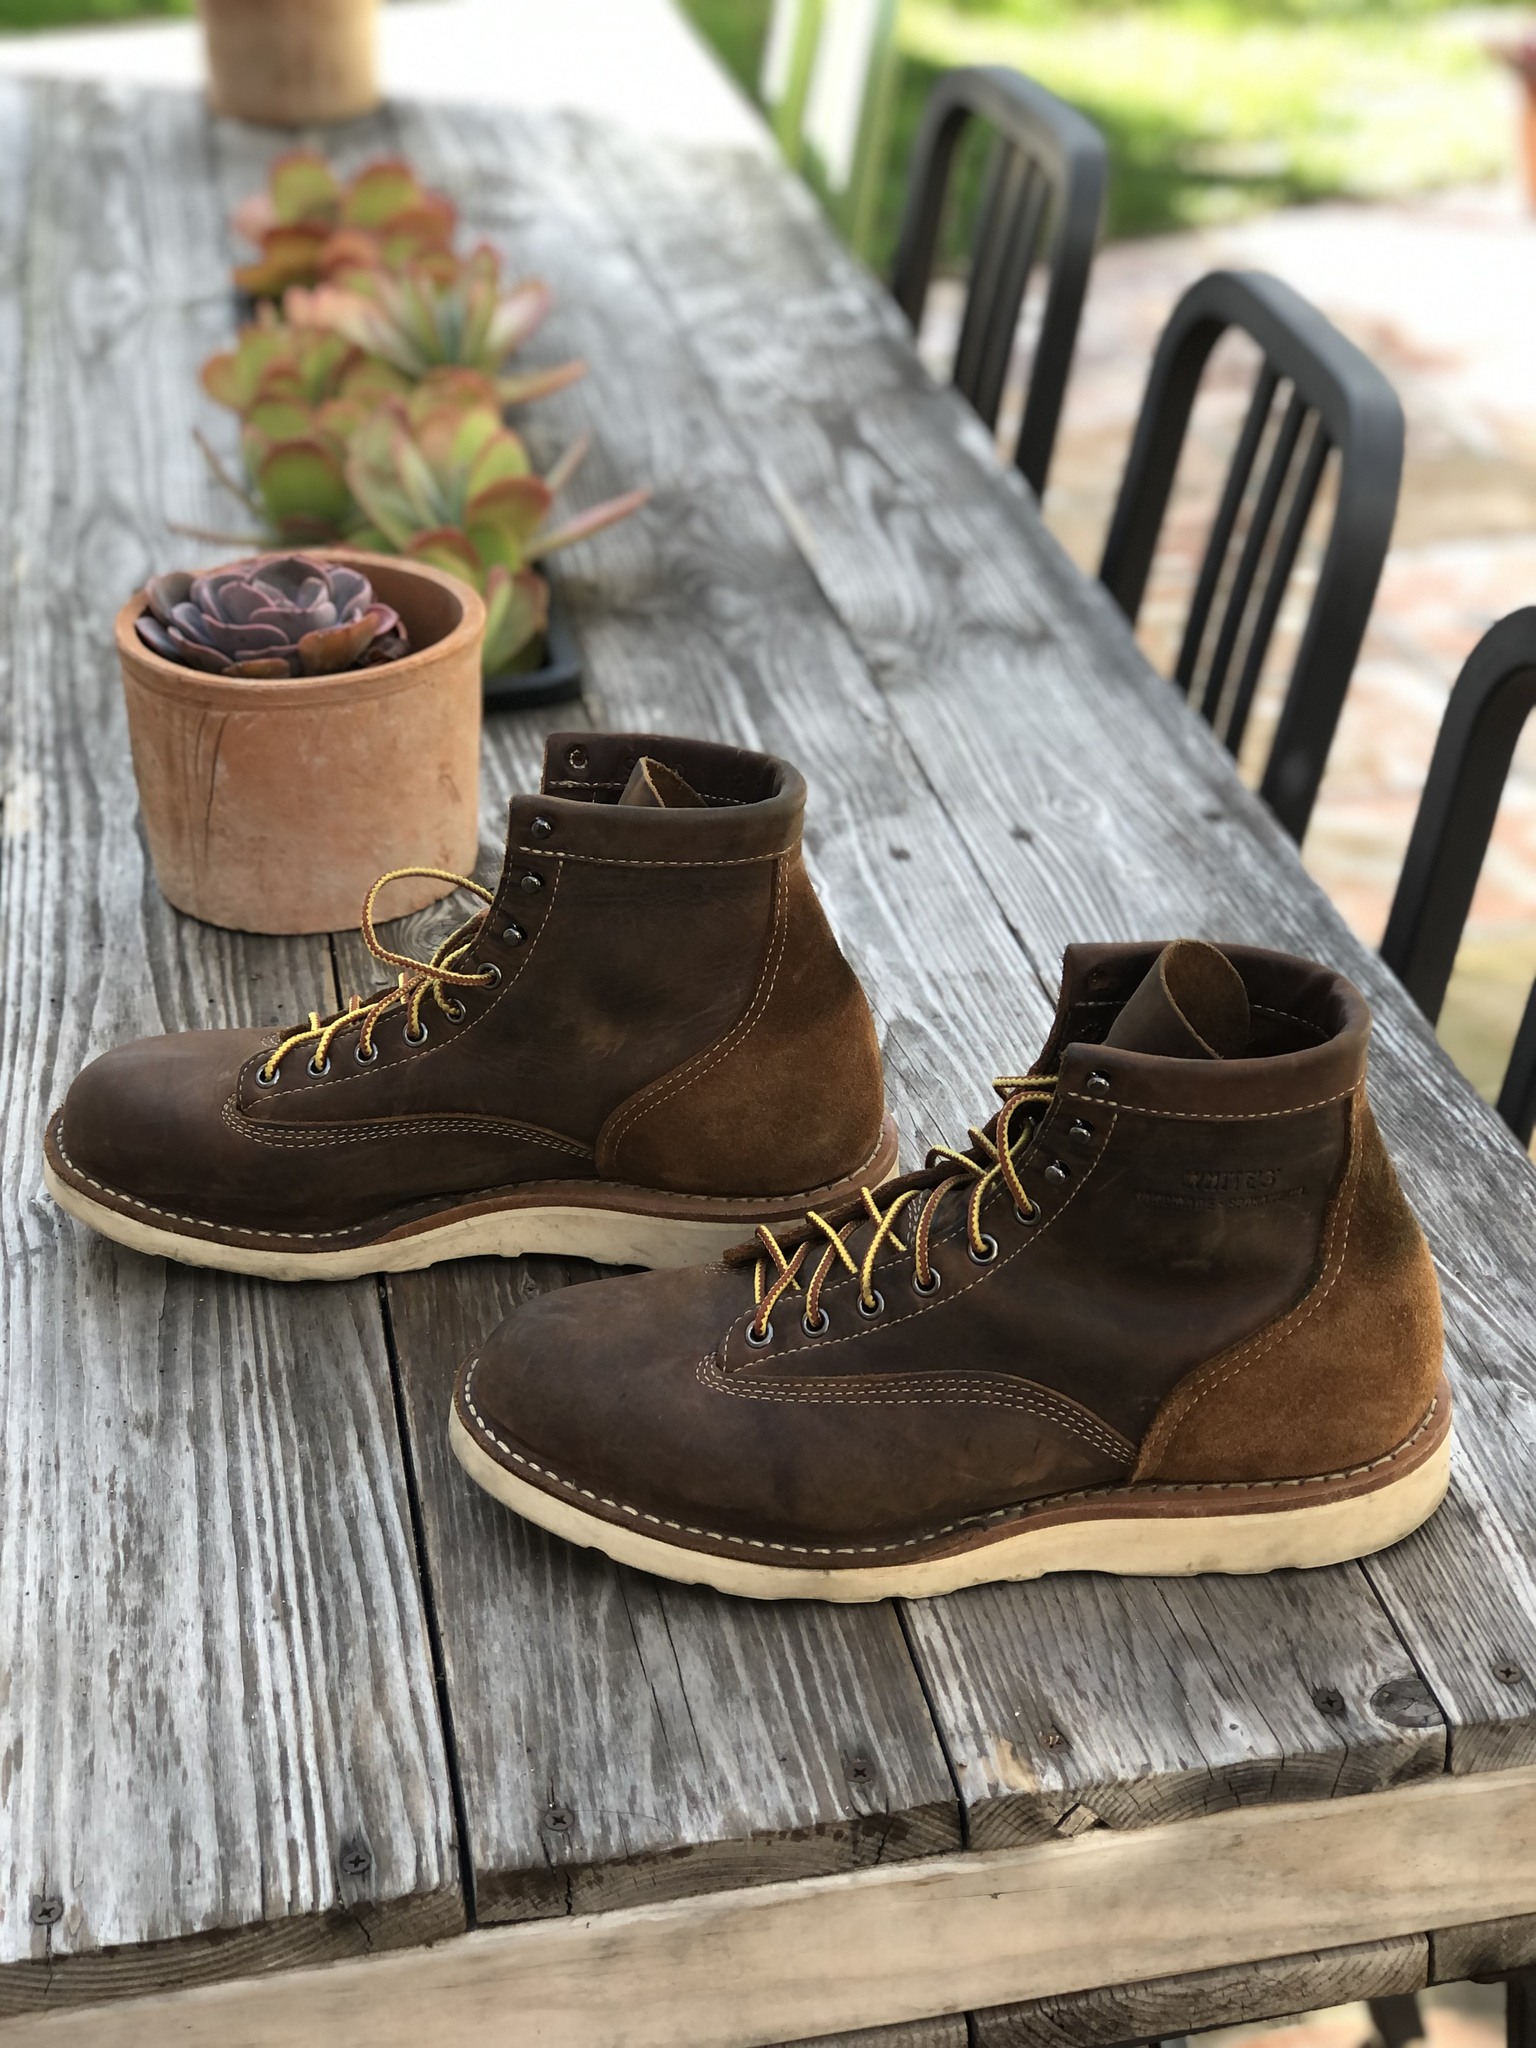 Huckberry x White's Boots Foreman LTT For Sale 9.5 D | The Fedora Lounge